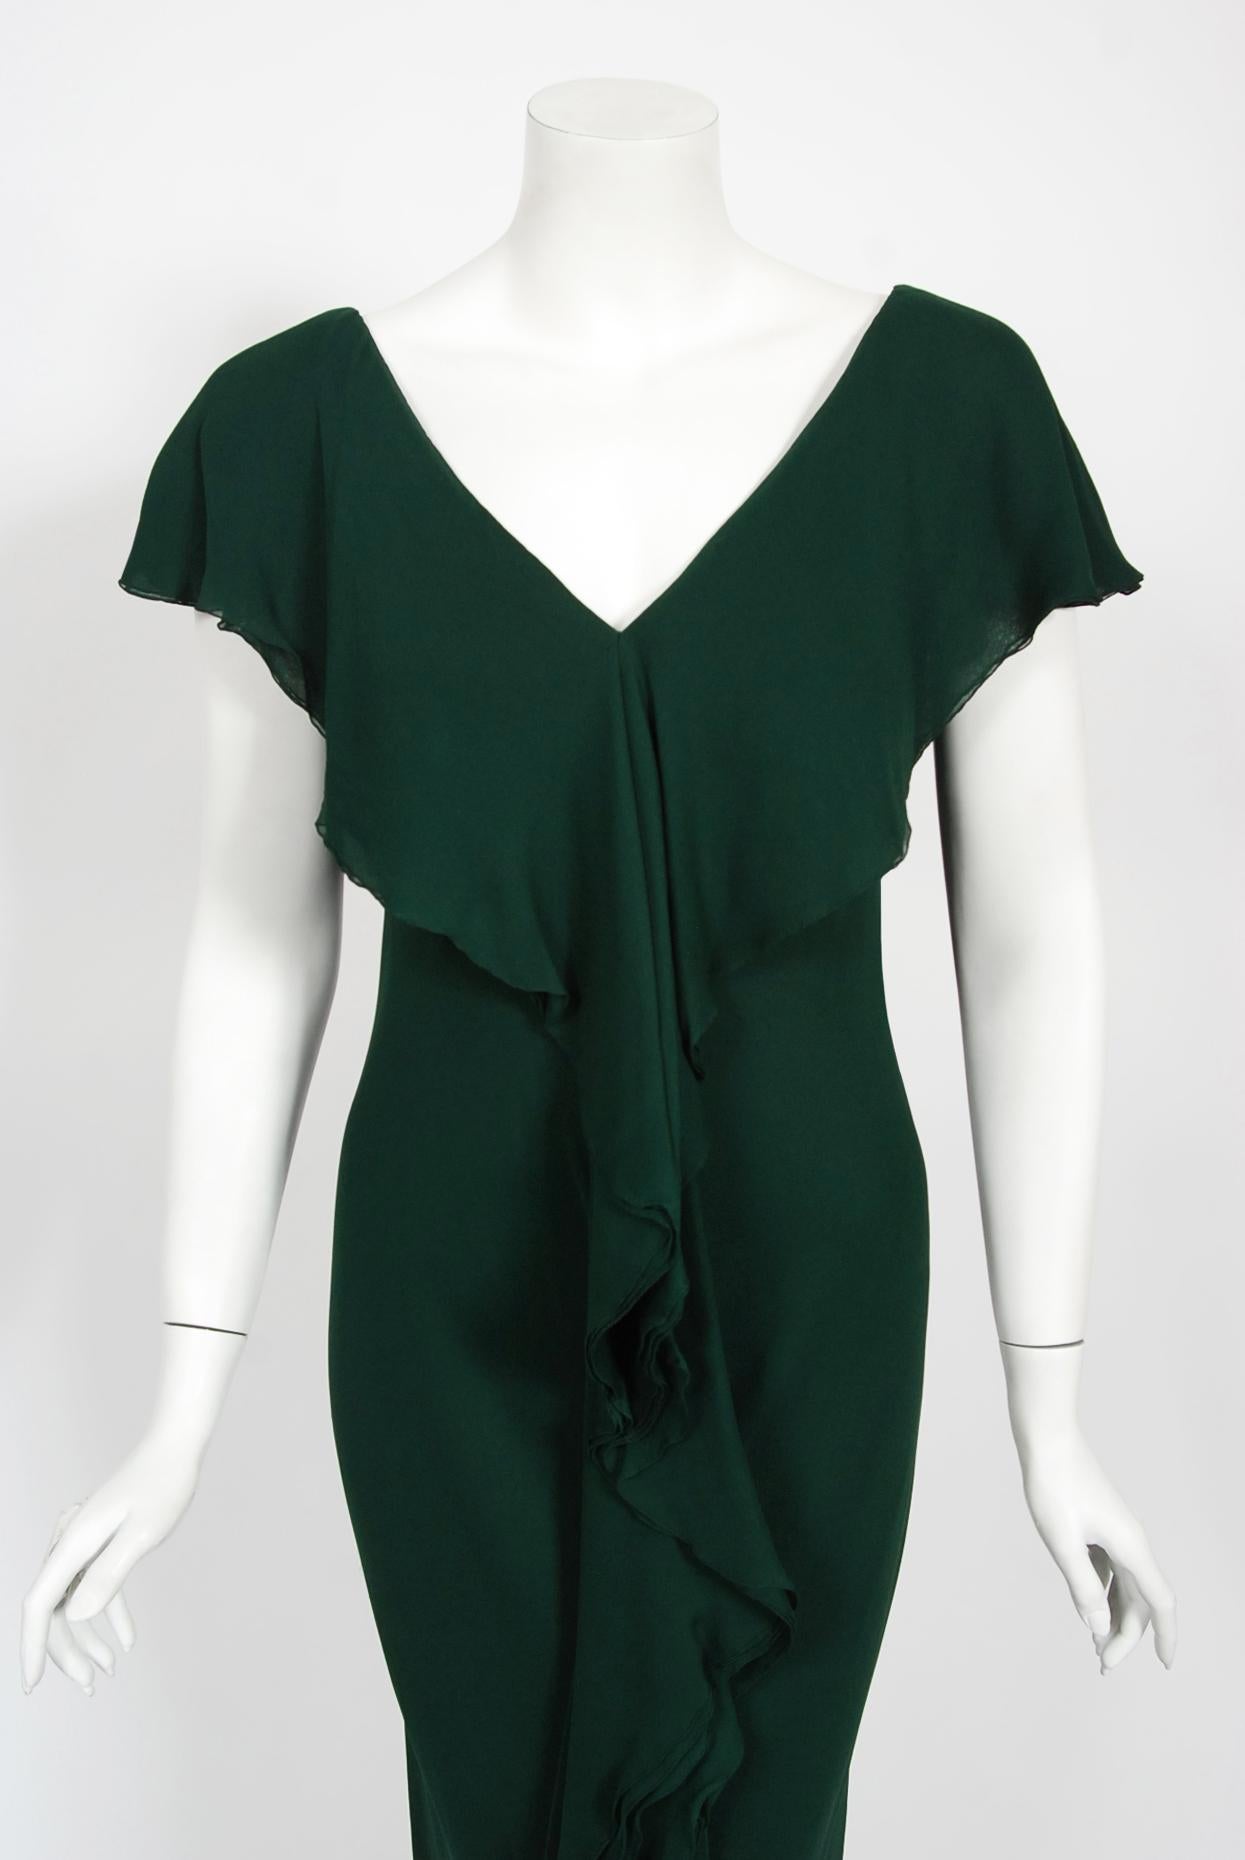 An absolutely gorgeous Halston couture forest green bias-cut gown dating back to his fall-winter 1975 collection. As shown, the same garment in lime green is archived at the Chicago History Museum. Halston revolutionized the way women dress and is